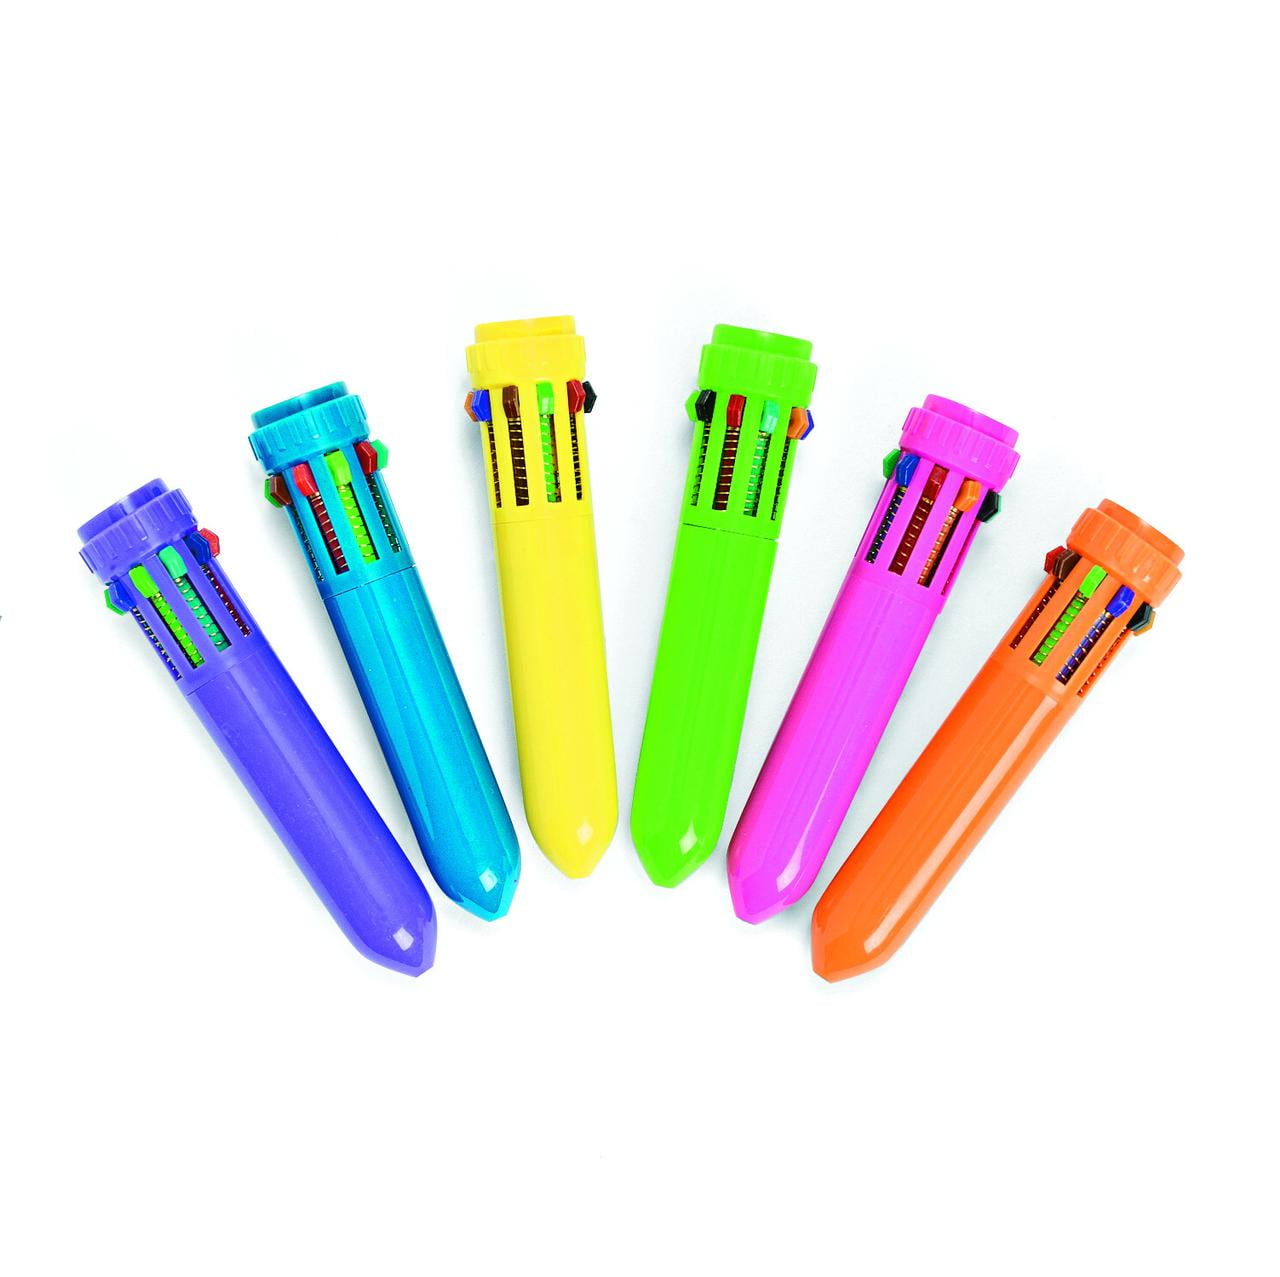 HESTYA 12 Pack Christmas 10 in 1 Mini Shuttle Pens Multicolor Pens Colorful  Plastic Neon Retractable Ballpoint Pens for Office School Supplies